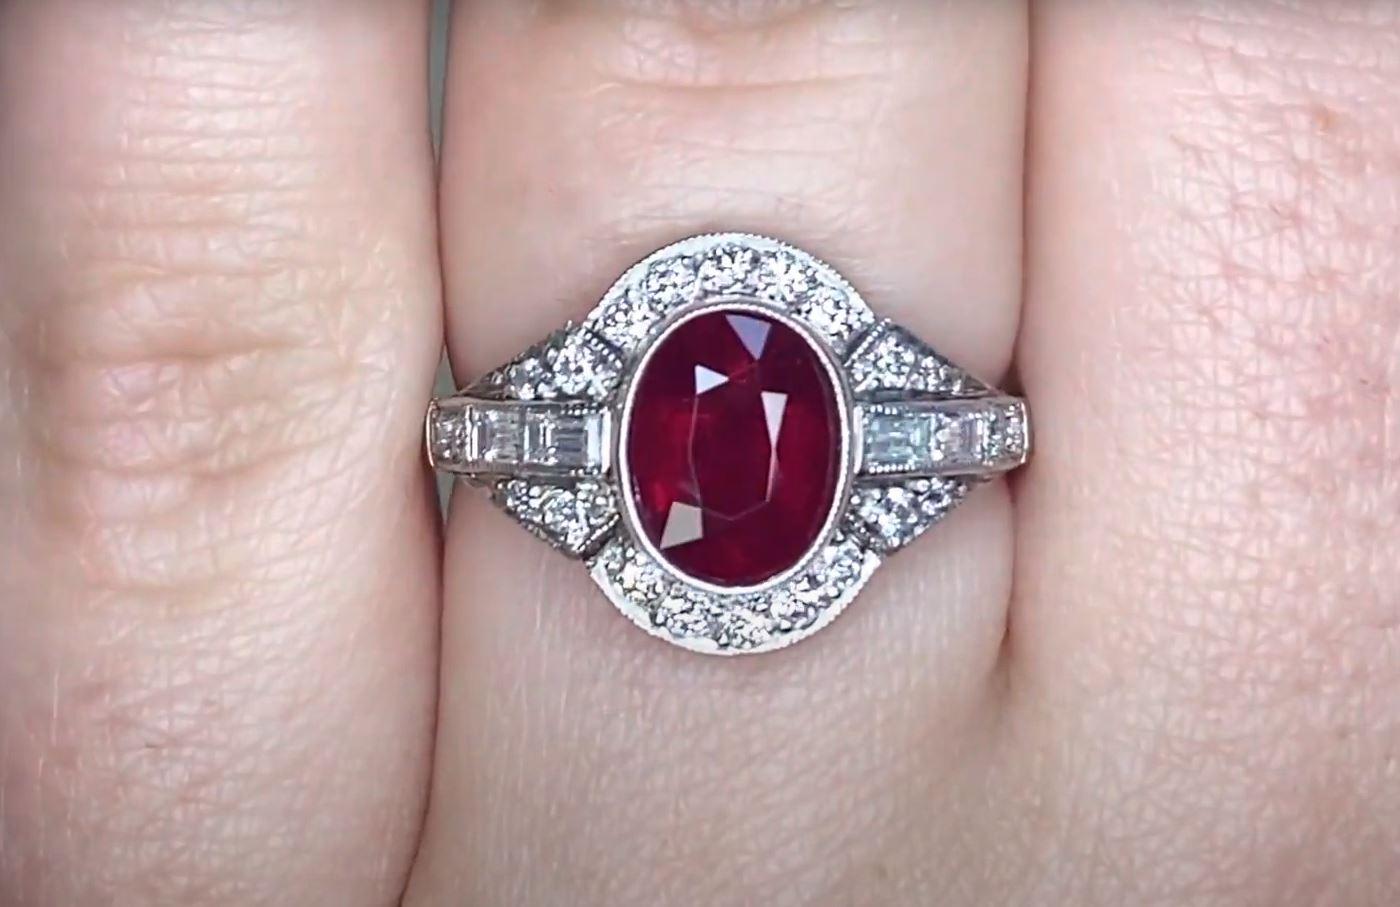 Women's 1.65ct Oval Cut Natural Ruby Engagement Ring, Diamond Halo, Platinum